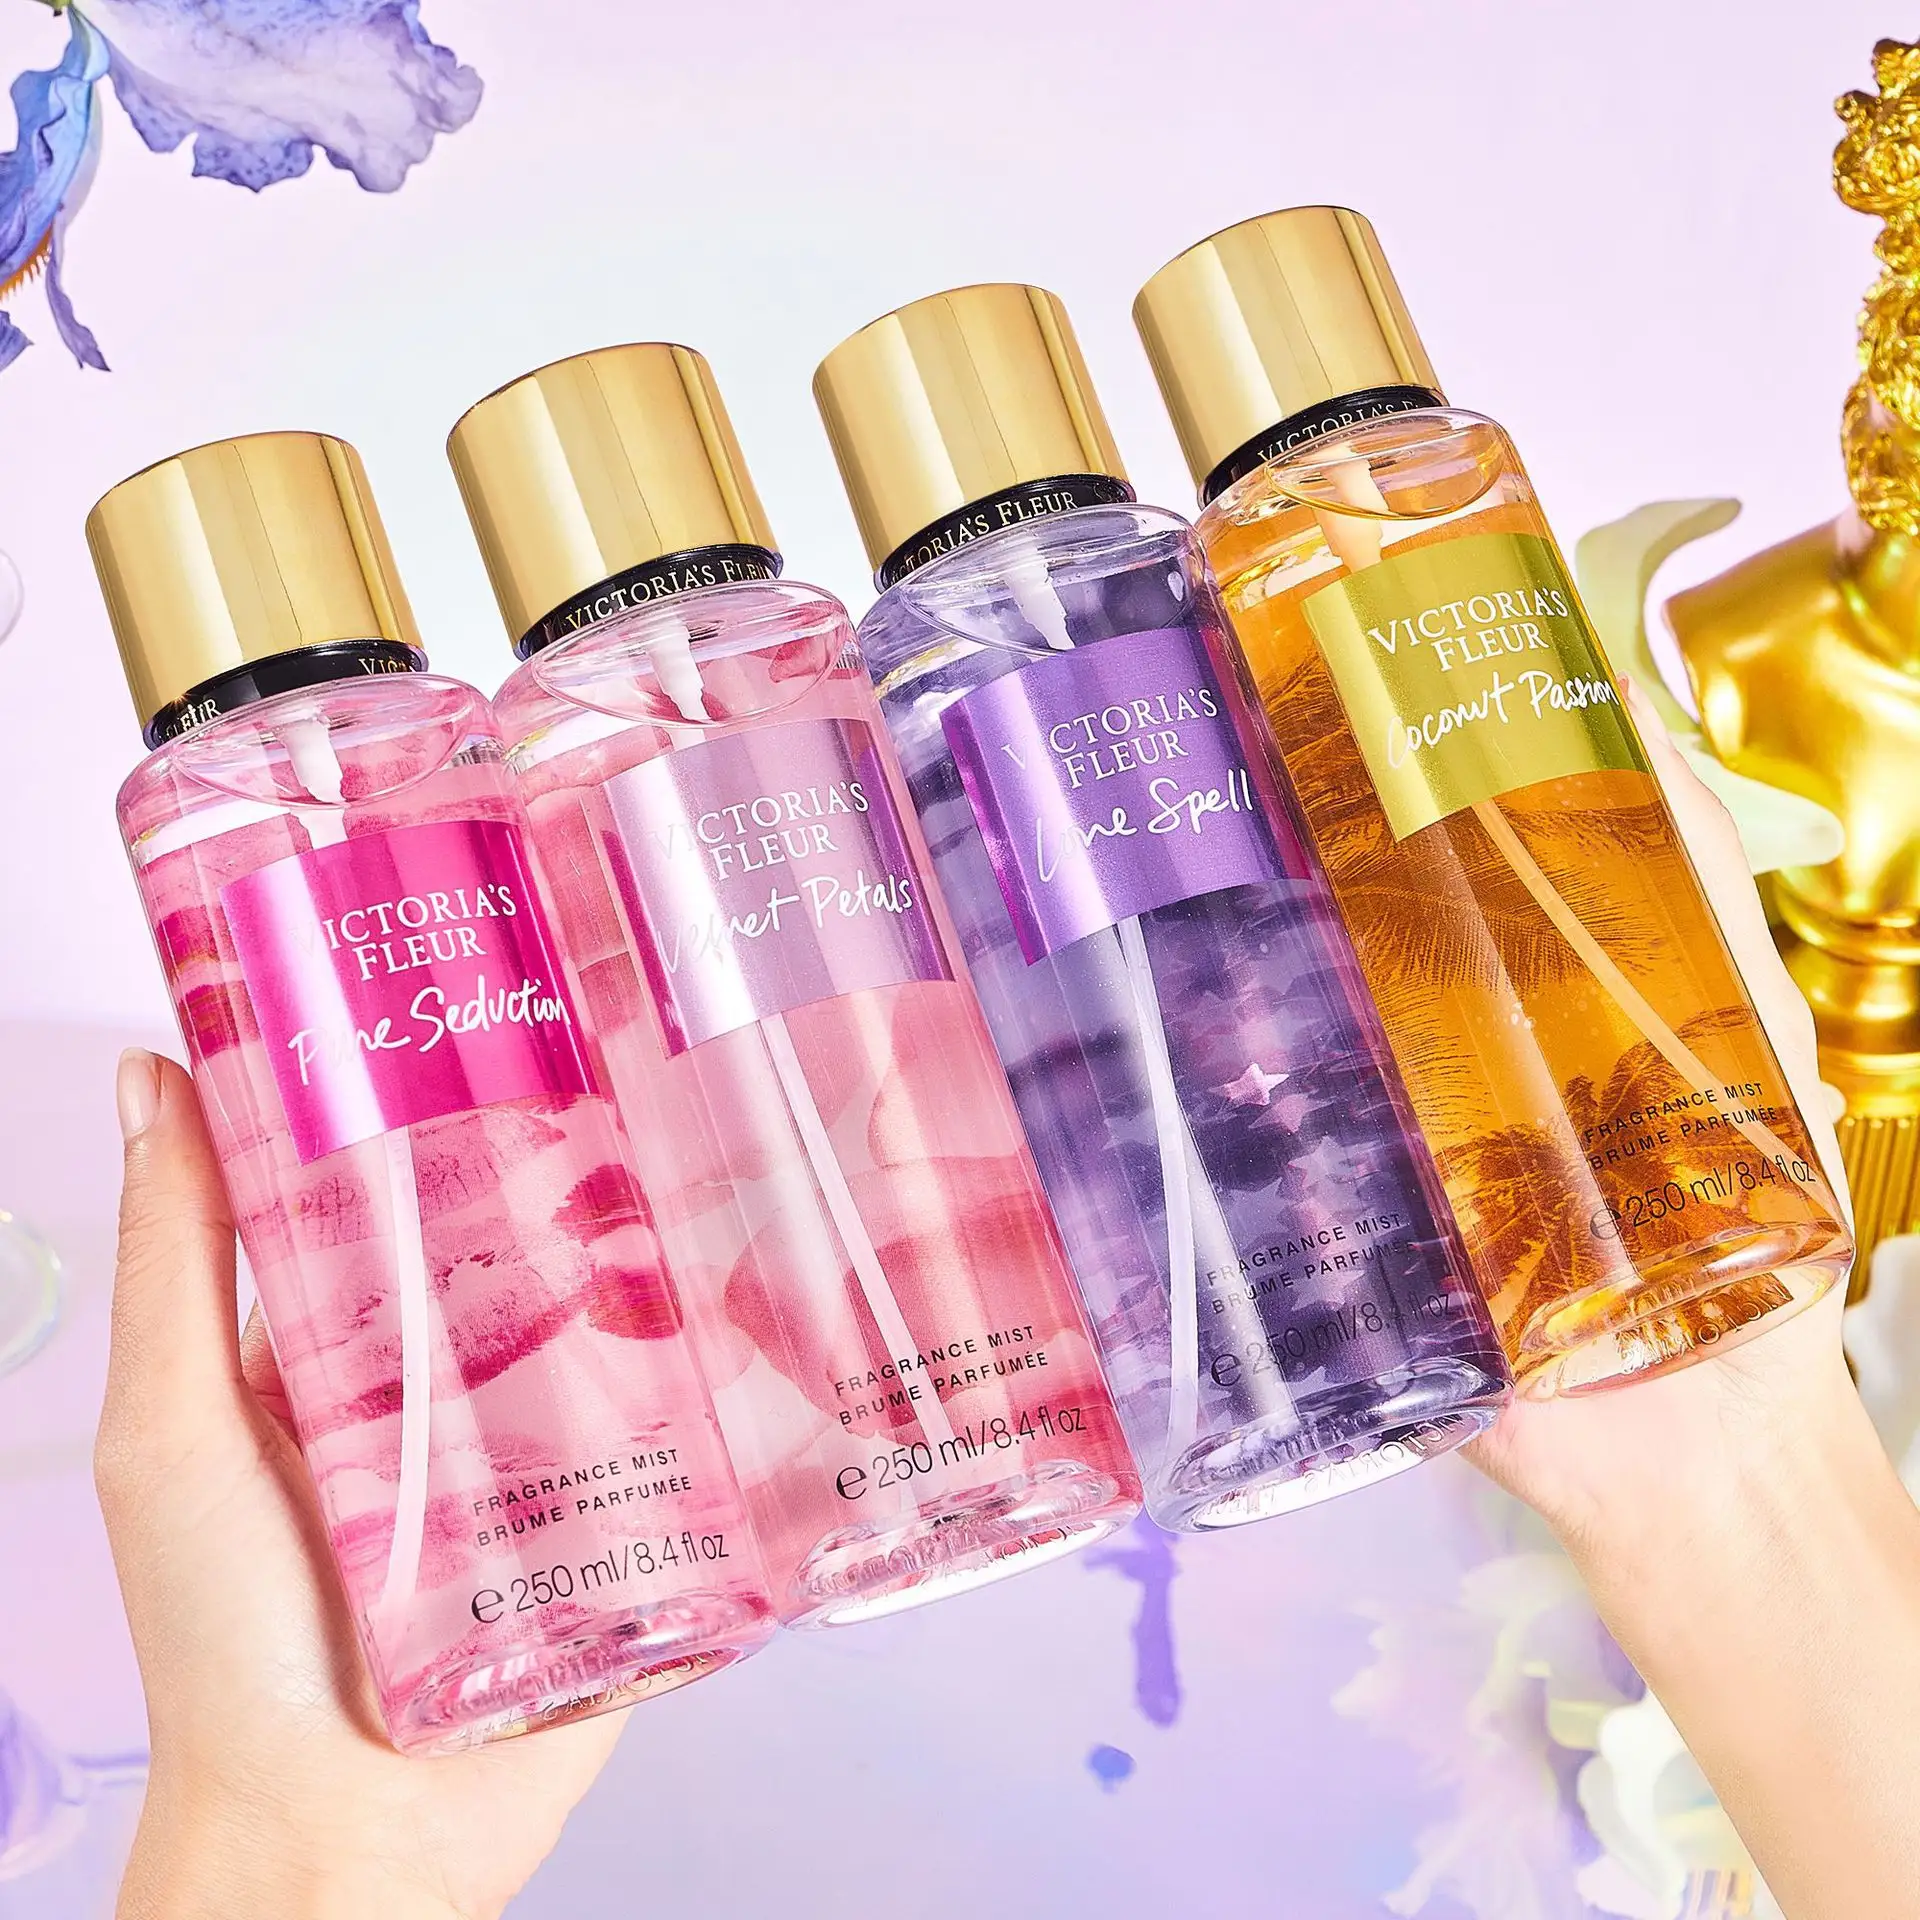 Victoria Flower Season Body Spray Big Brand Women's Perfume with Floral and Fruit Tones Lasting Fragrance Thailand's Top Style